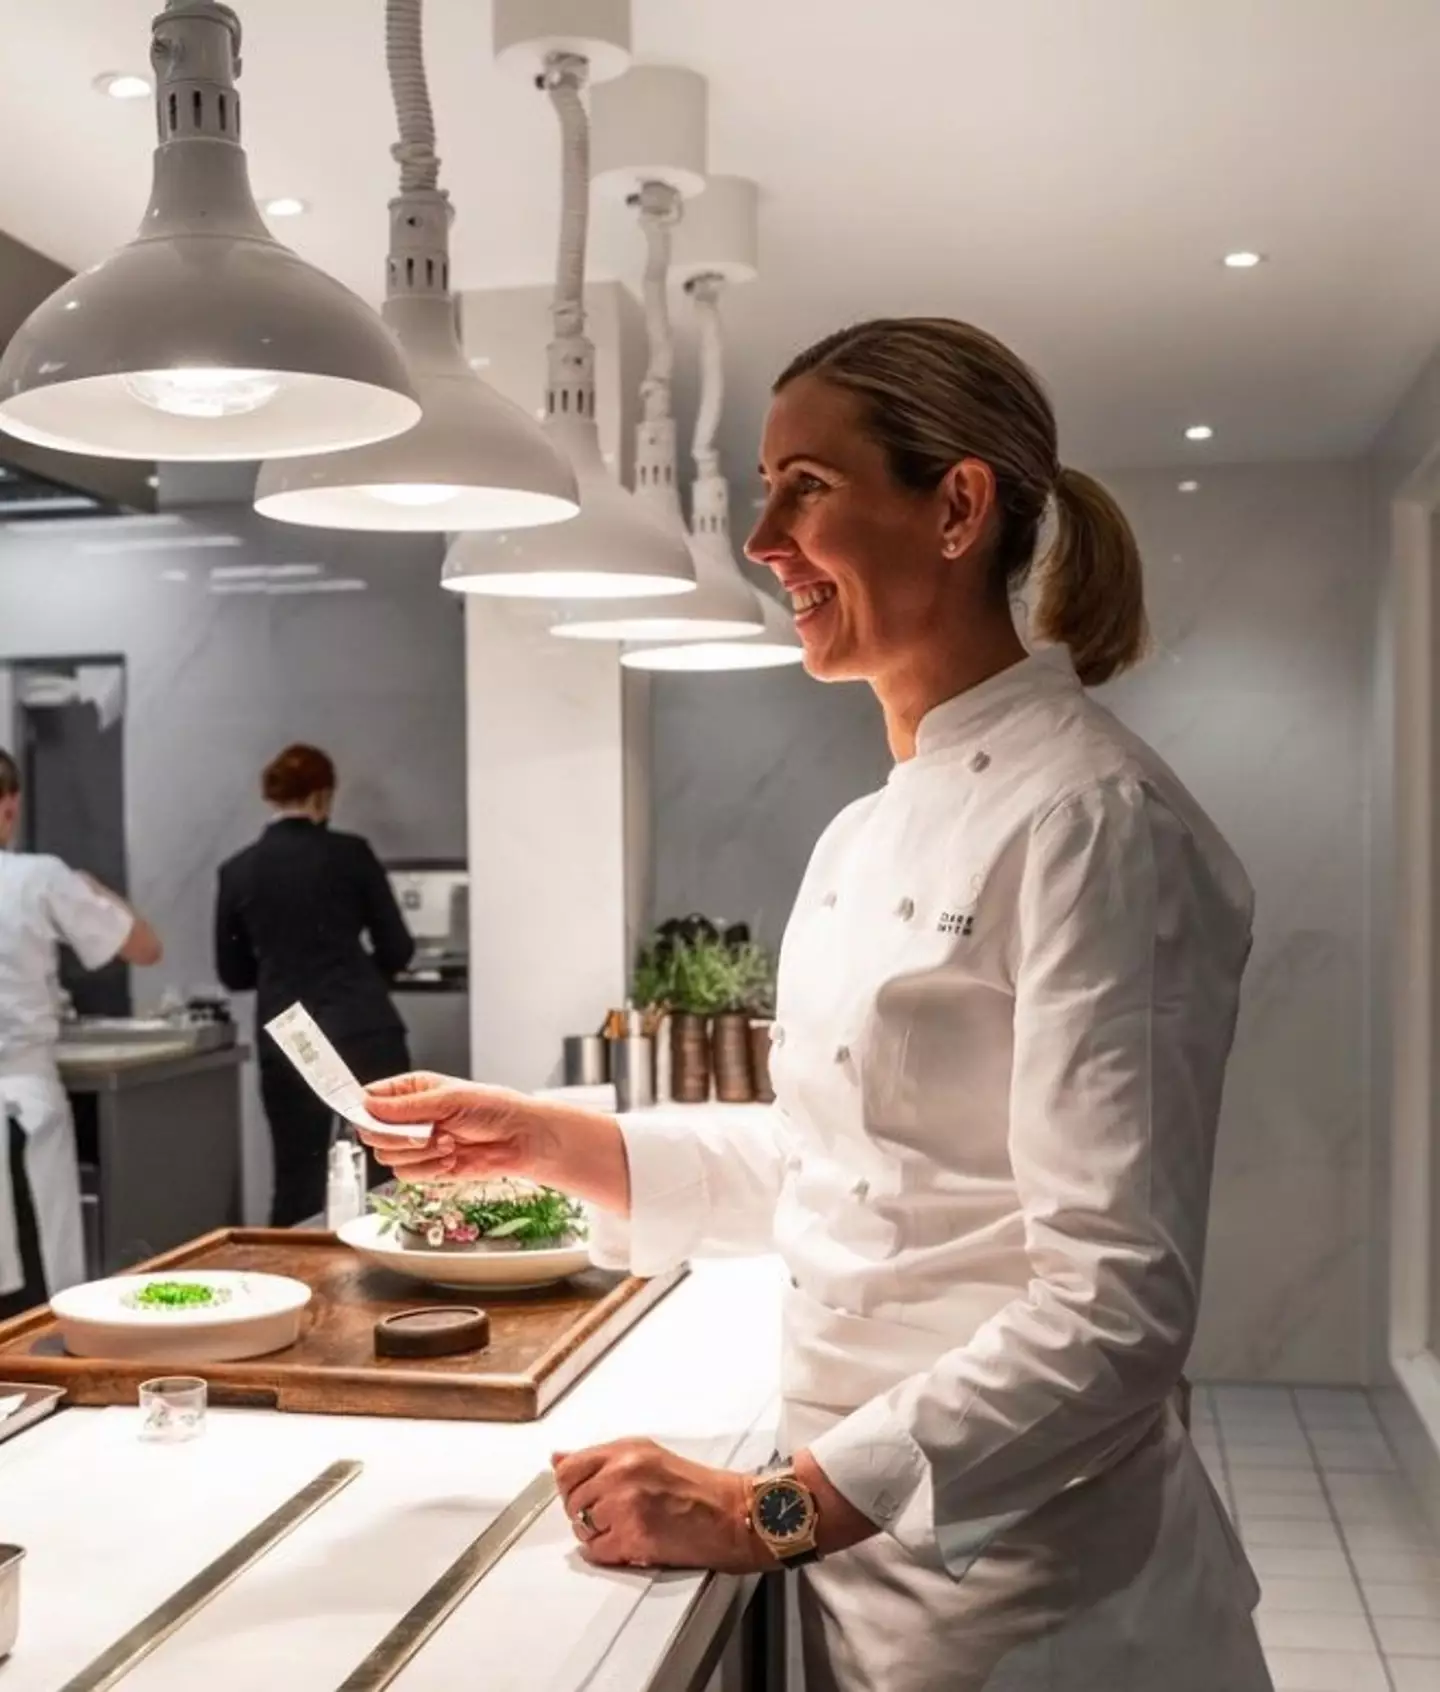 Located in London's Notting Hill, the eatery picked up the top accolade in the 2021 Michelin Guide - and has kept it ever since.